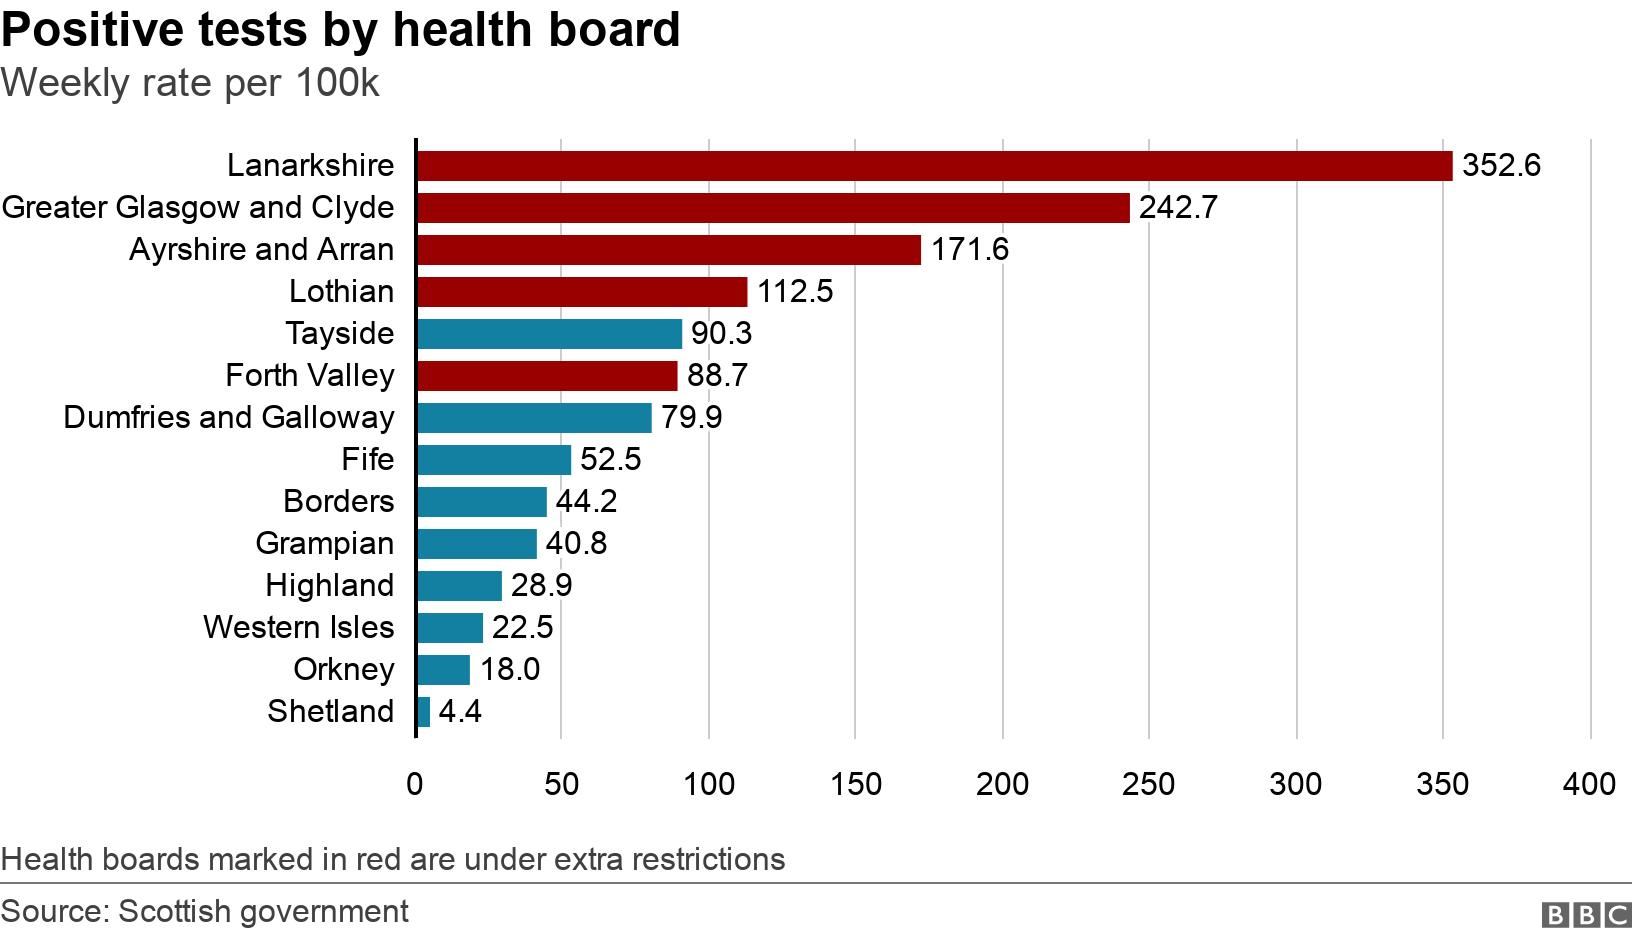 Positive tests by health board. Weekly rate per 100k. Health boards marked in red are under extra restrictions.